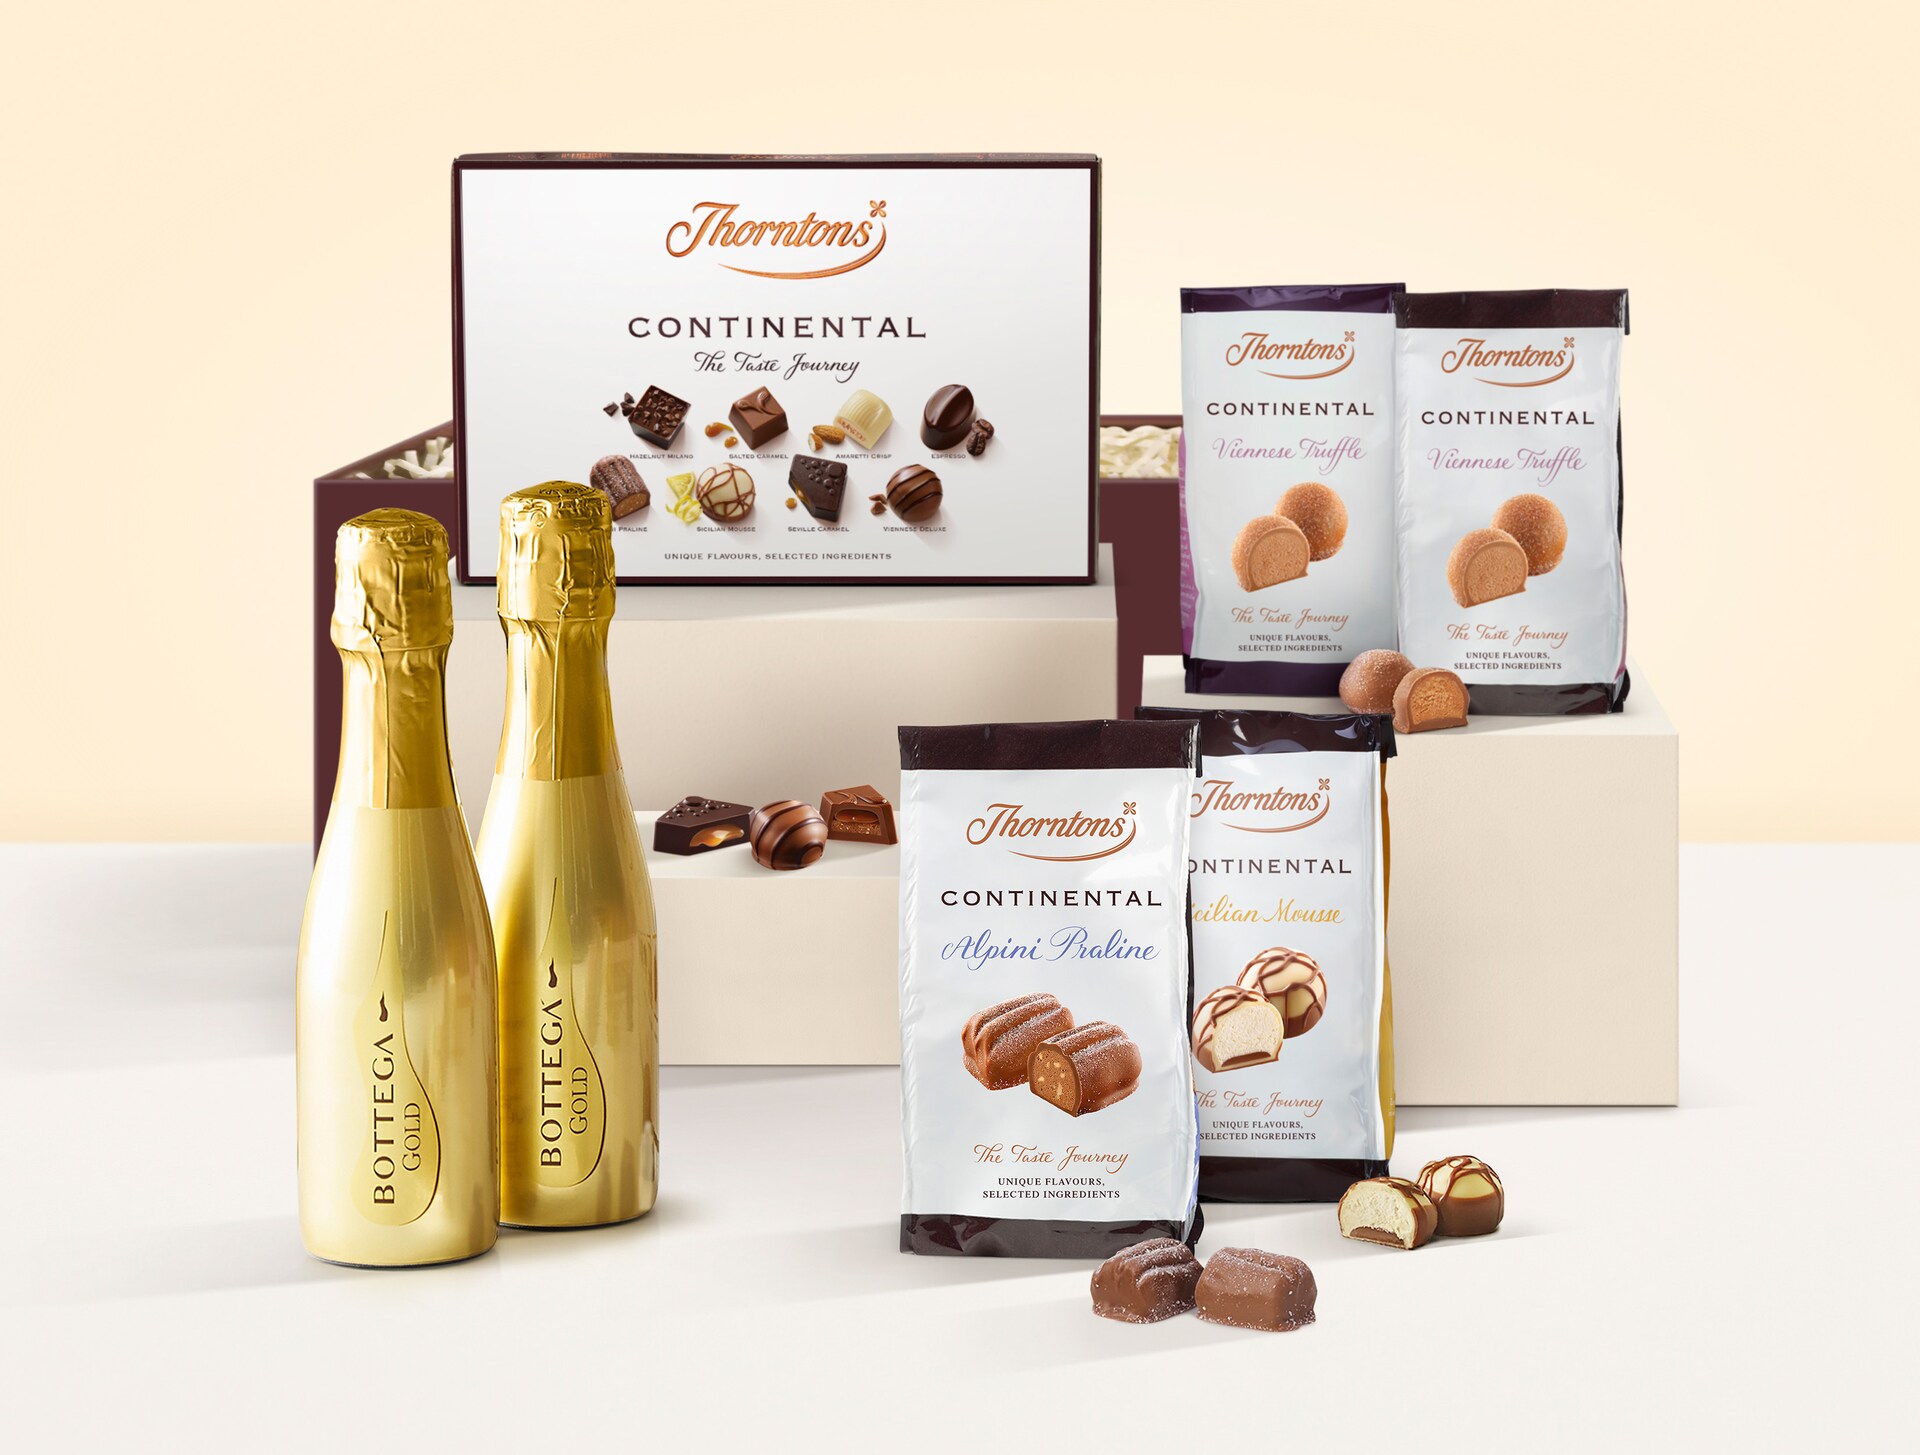 https://www.thorntons.com/medias/sys_master/images/h68/hc6/8916768456734/GB54983_main/GB54983-main.png?resize=ProductGridComponent